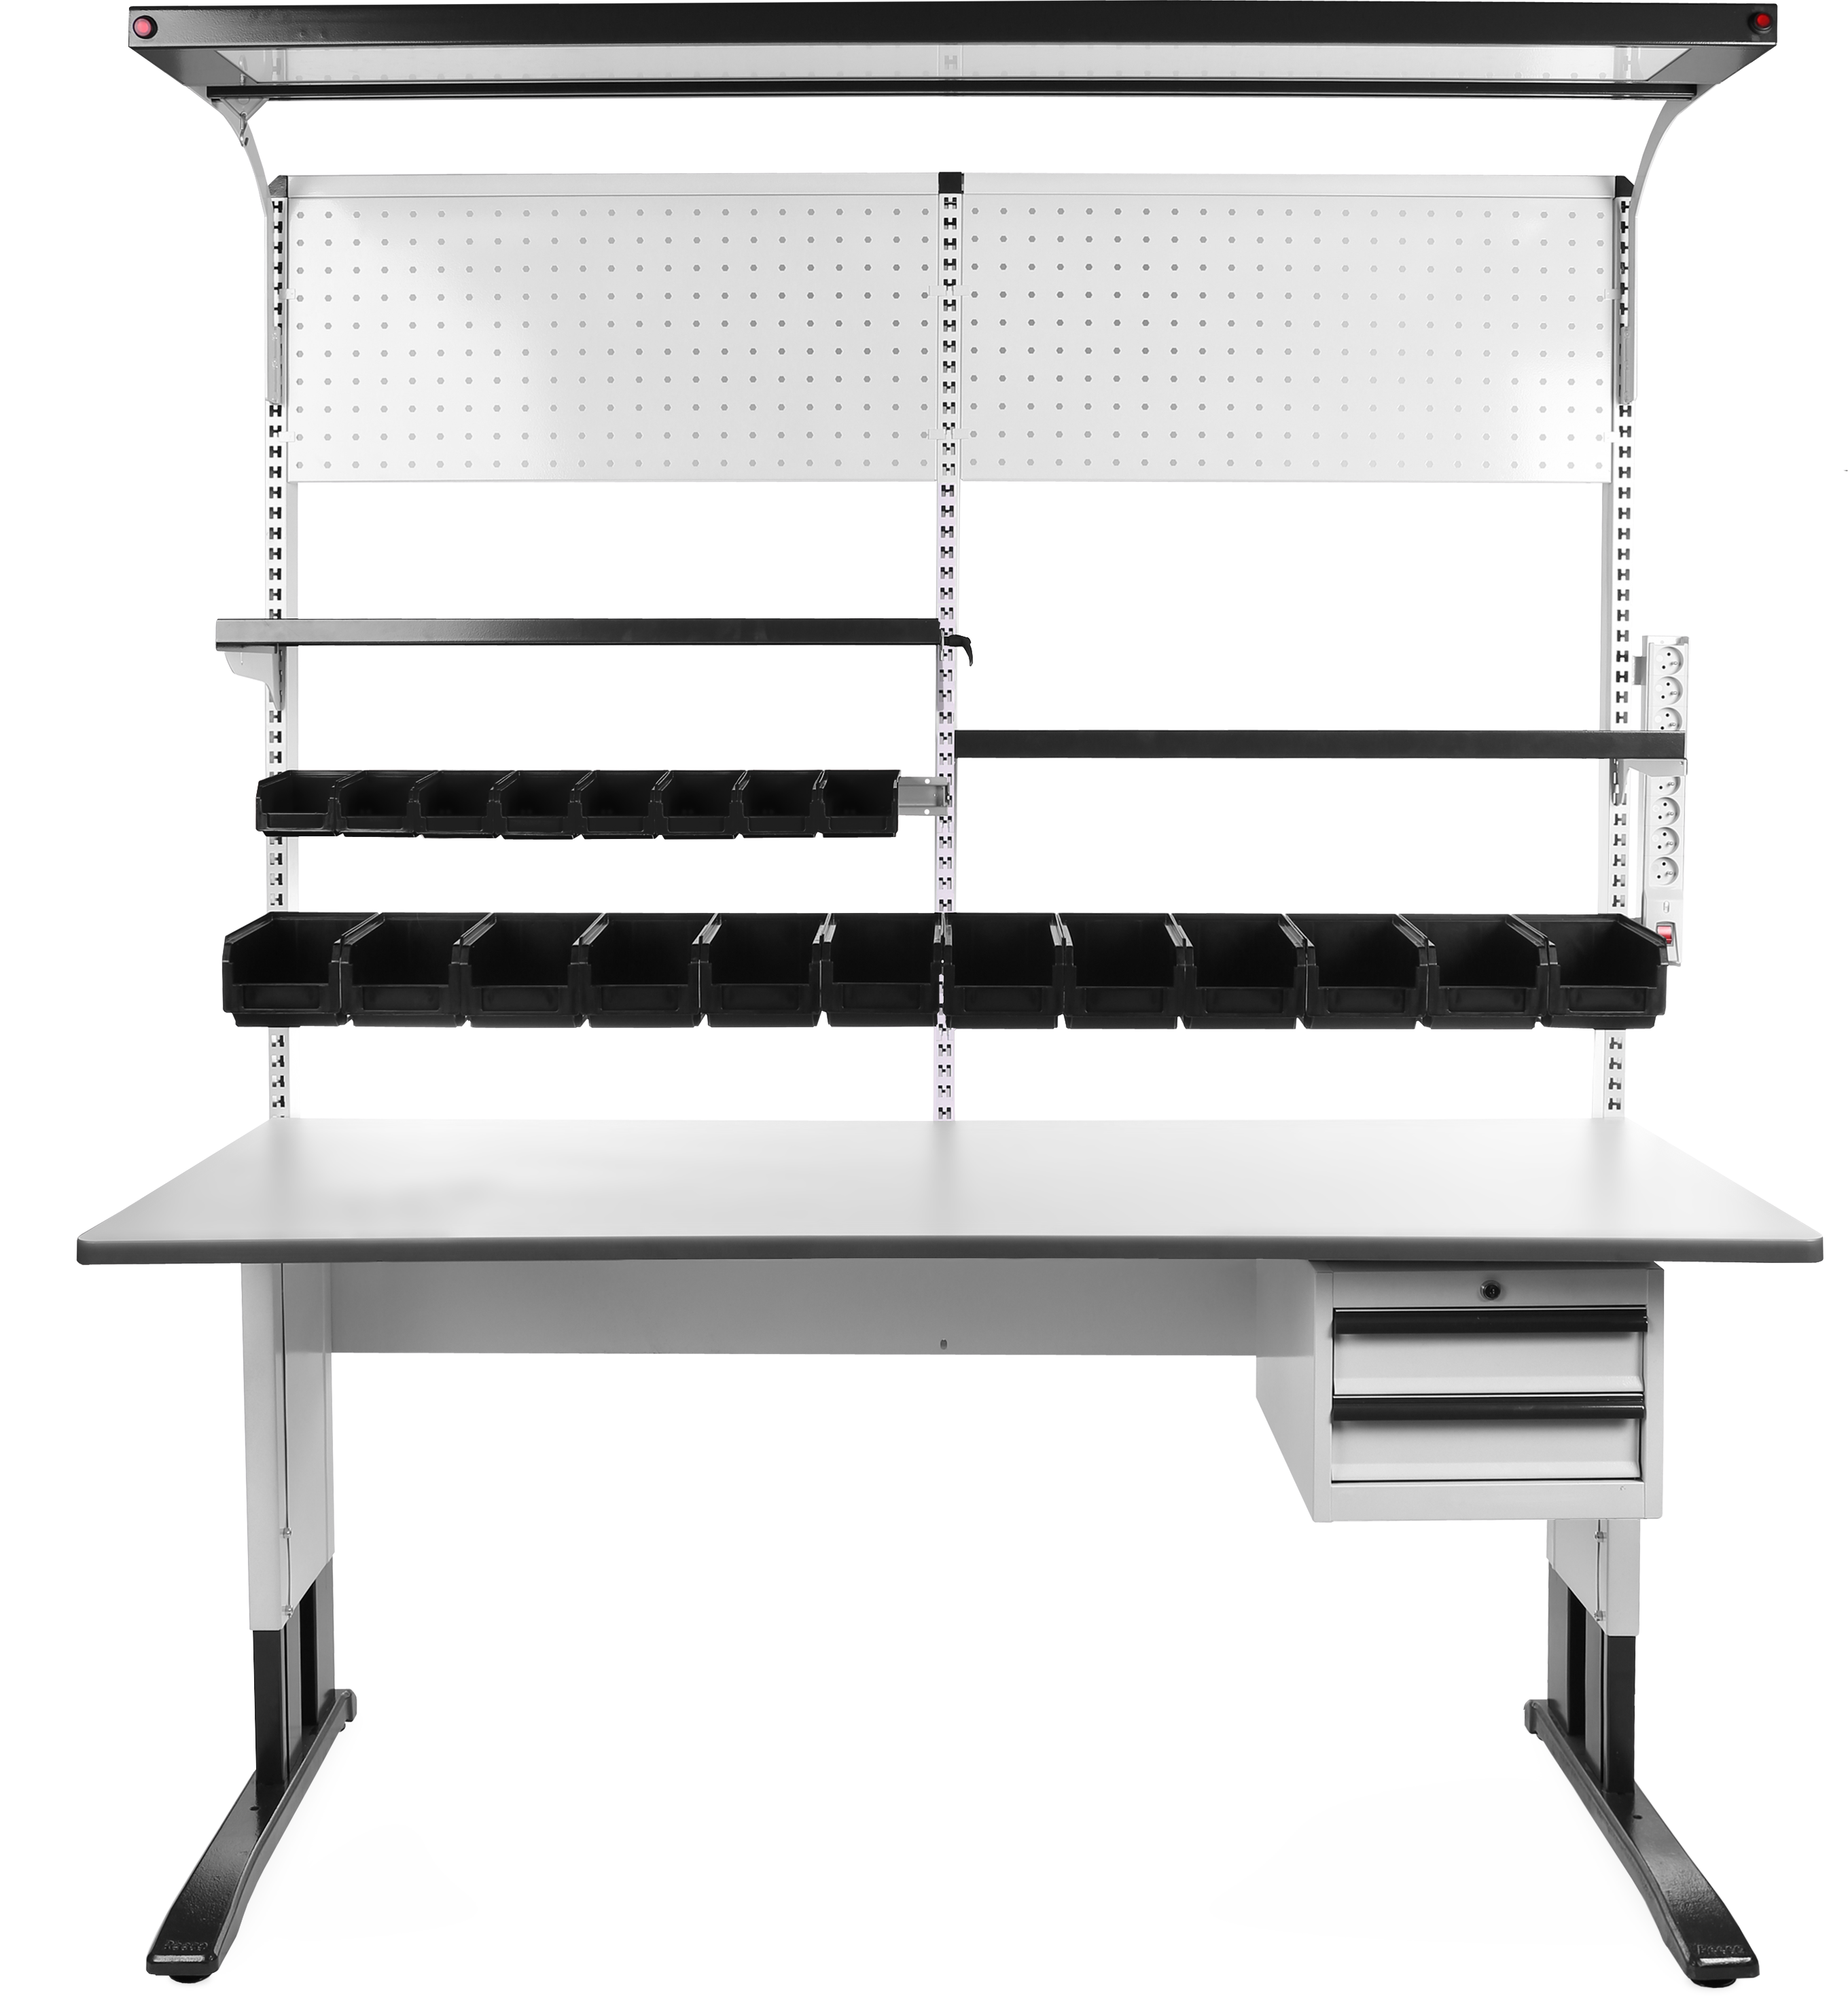 Premium-Workstation-ESD-Standard-Rectangular-Table-Top-Reeco-Robert-1530-x-750-mm-ESD-Products-AES